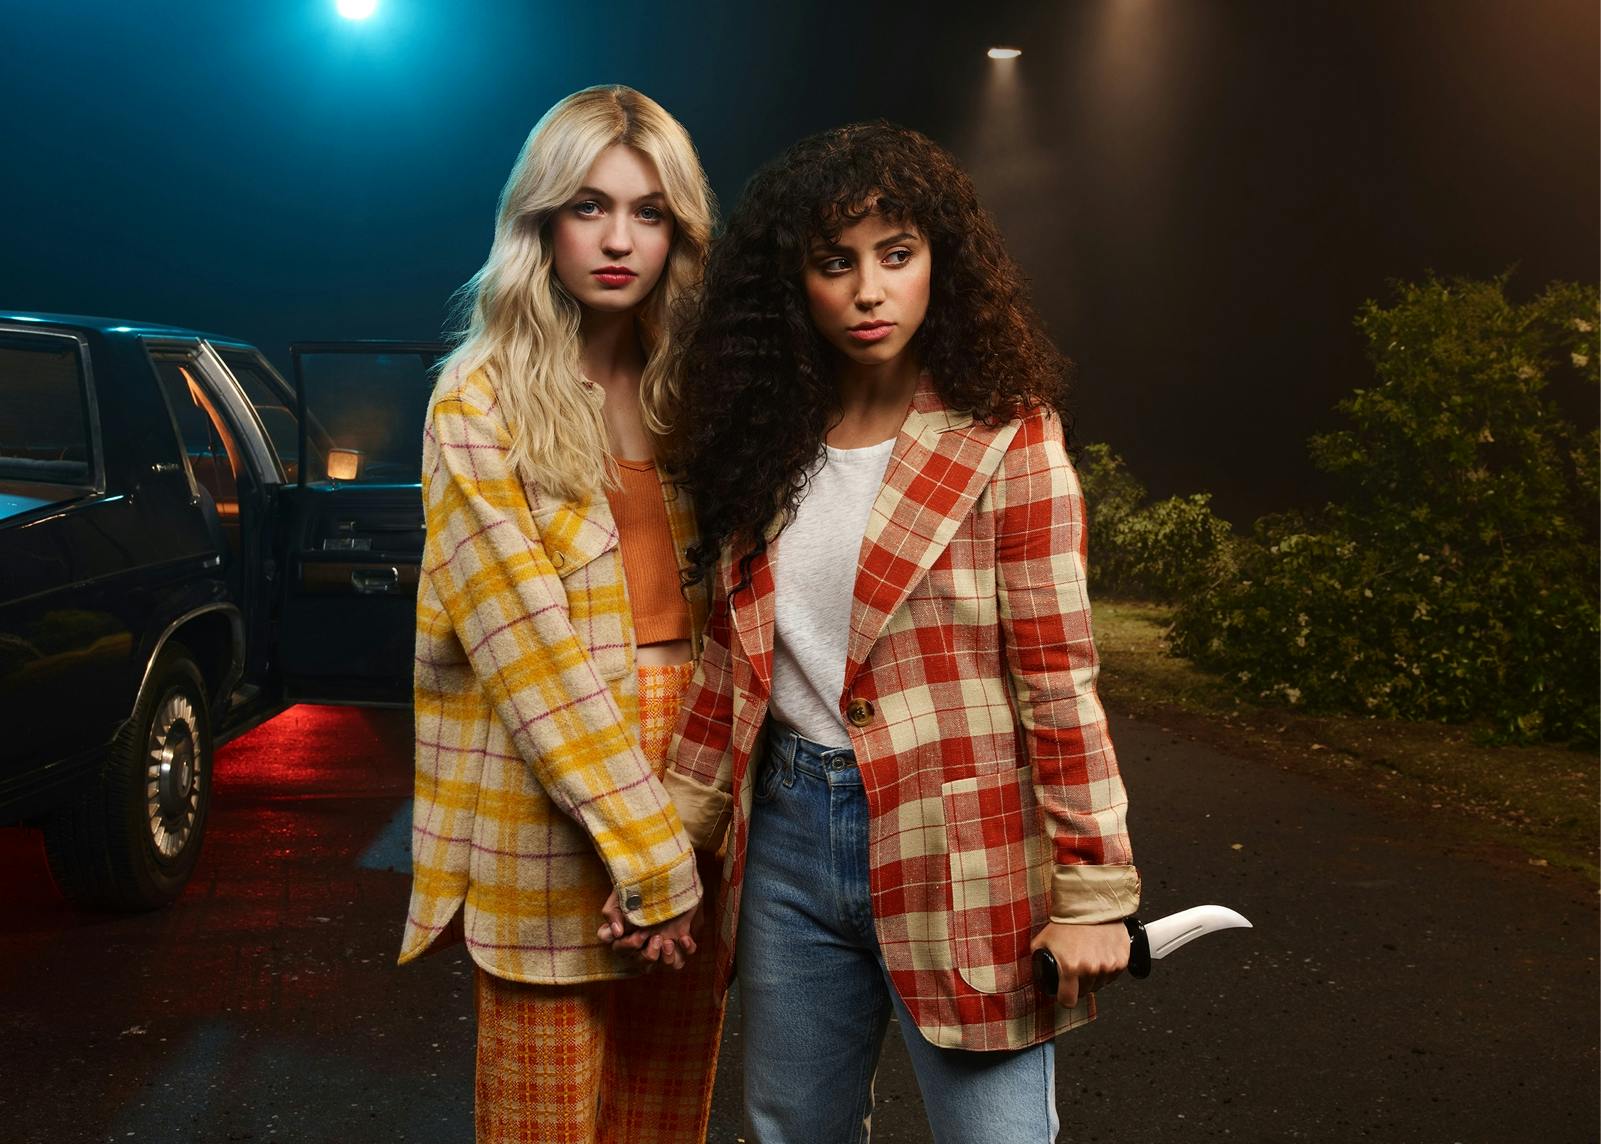 Sam Fraser (Olivia Scott Welch) and Deena (Kiana Madeira) stand holding hands in a dark, streetlight-lit shot. They both wear plaid jackets, and Deena carries a knife.